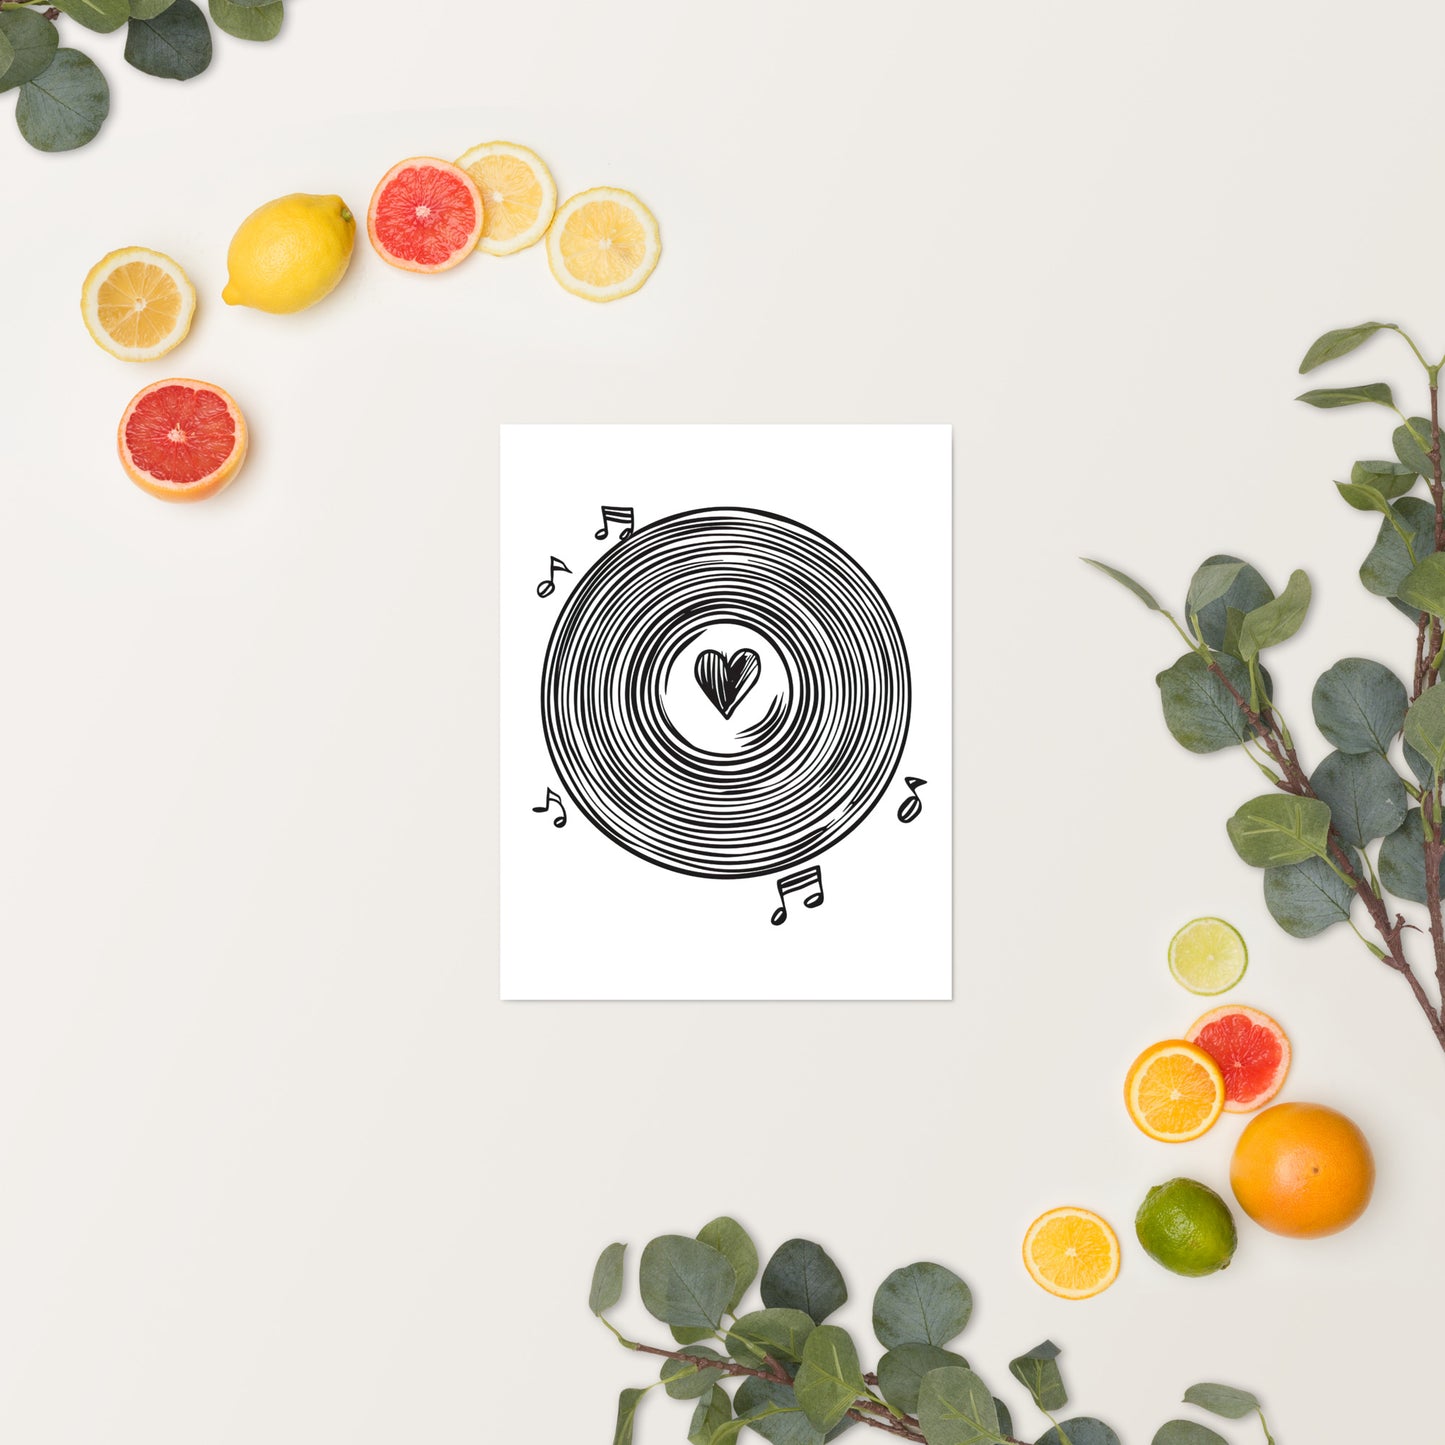 Love Vinyl Records Poster [FOR MINIMALISTS]